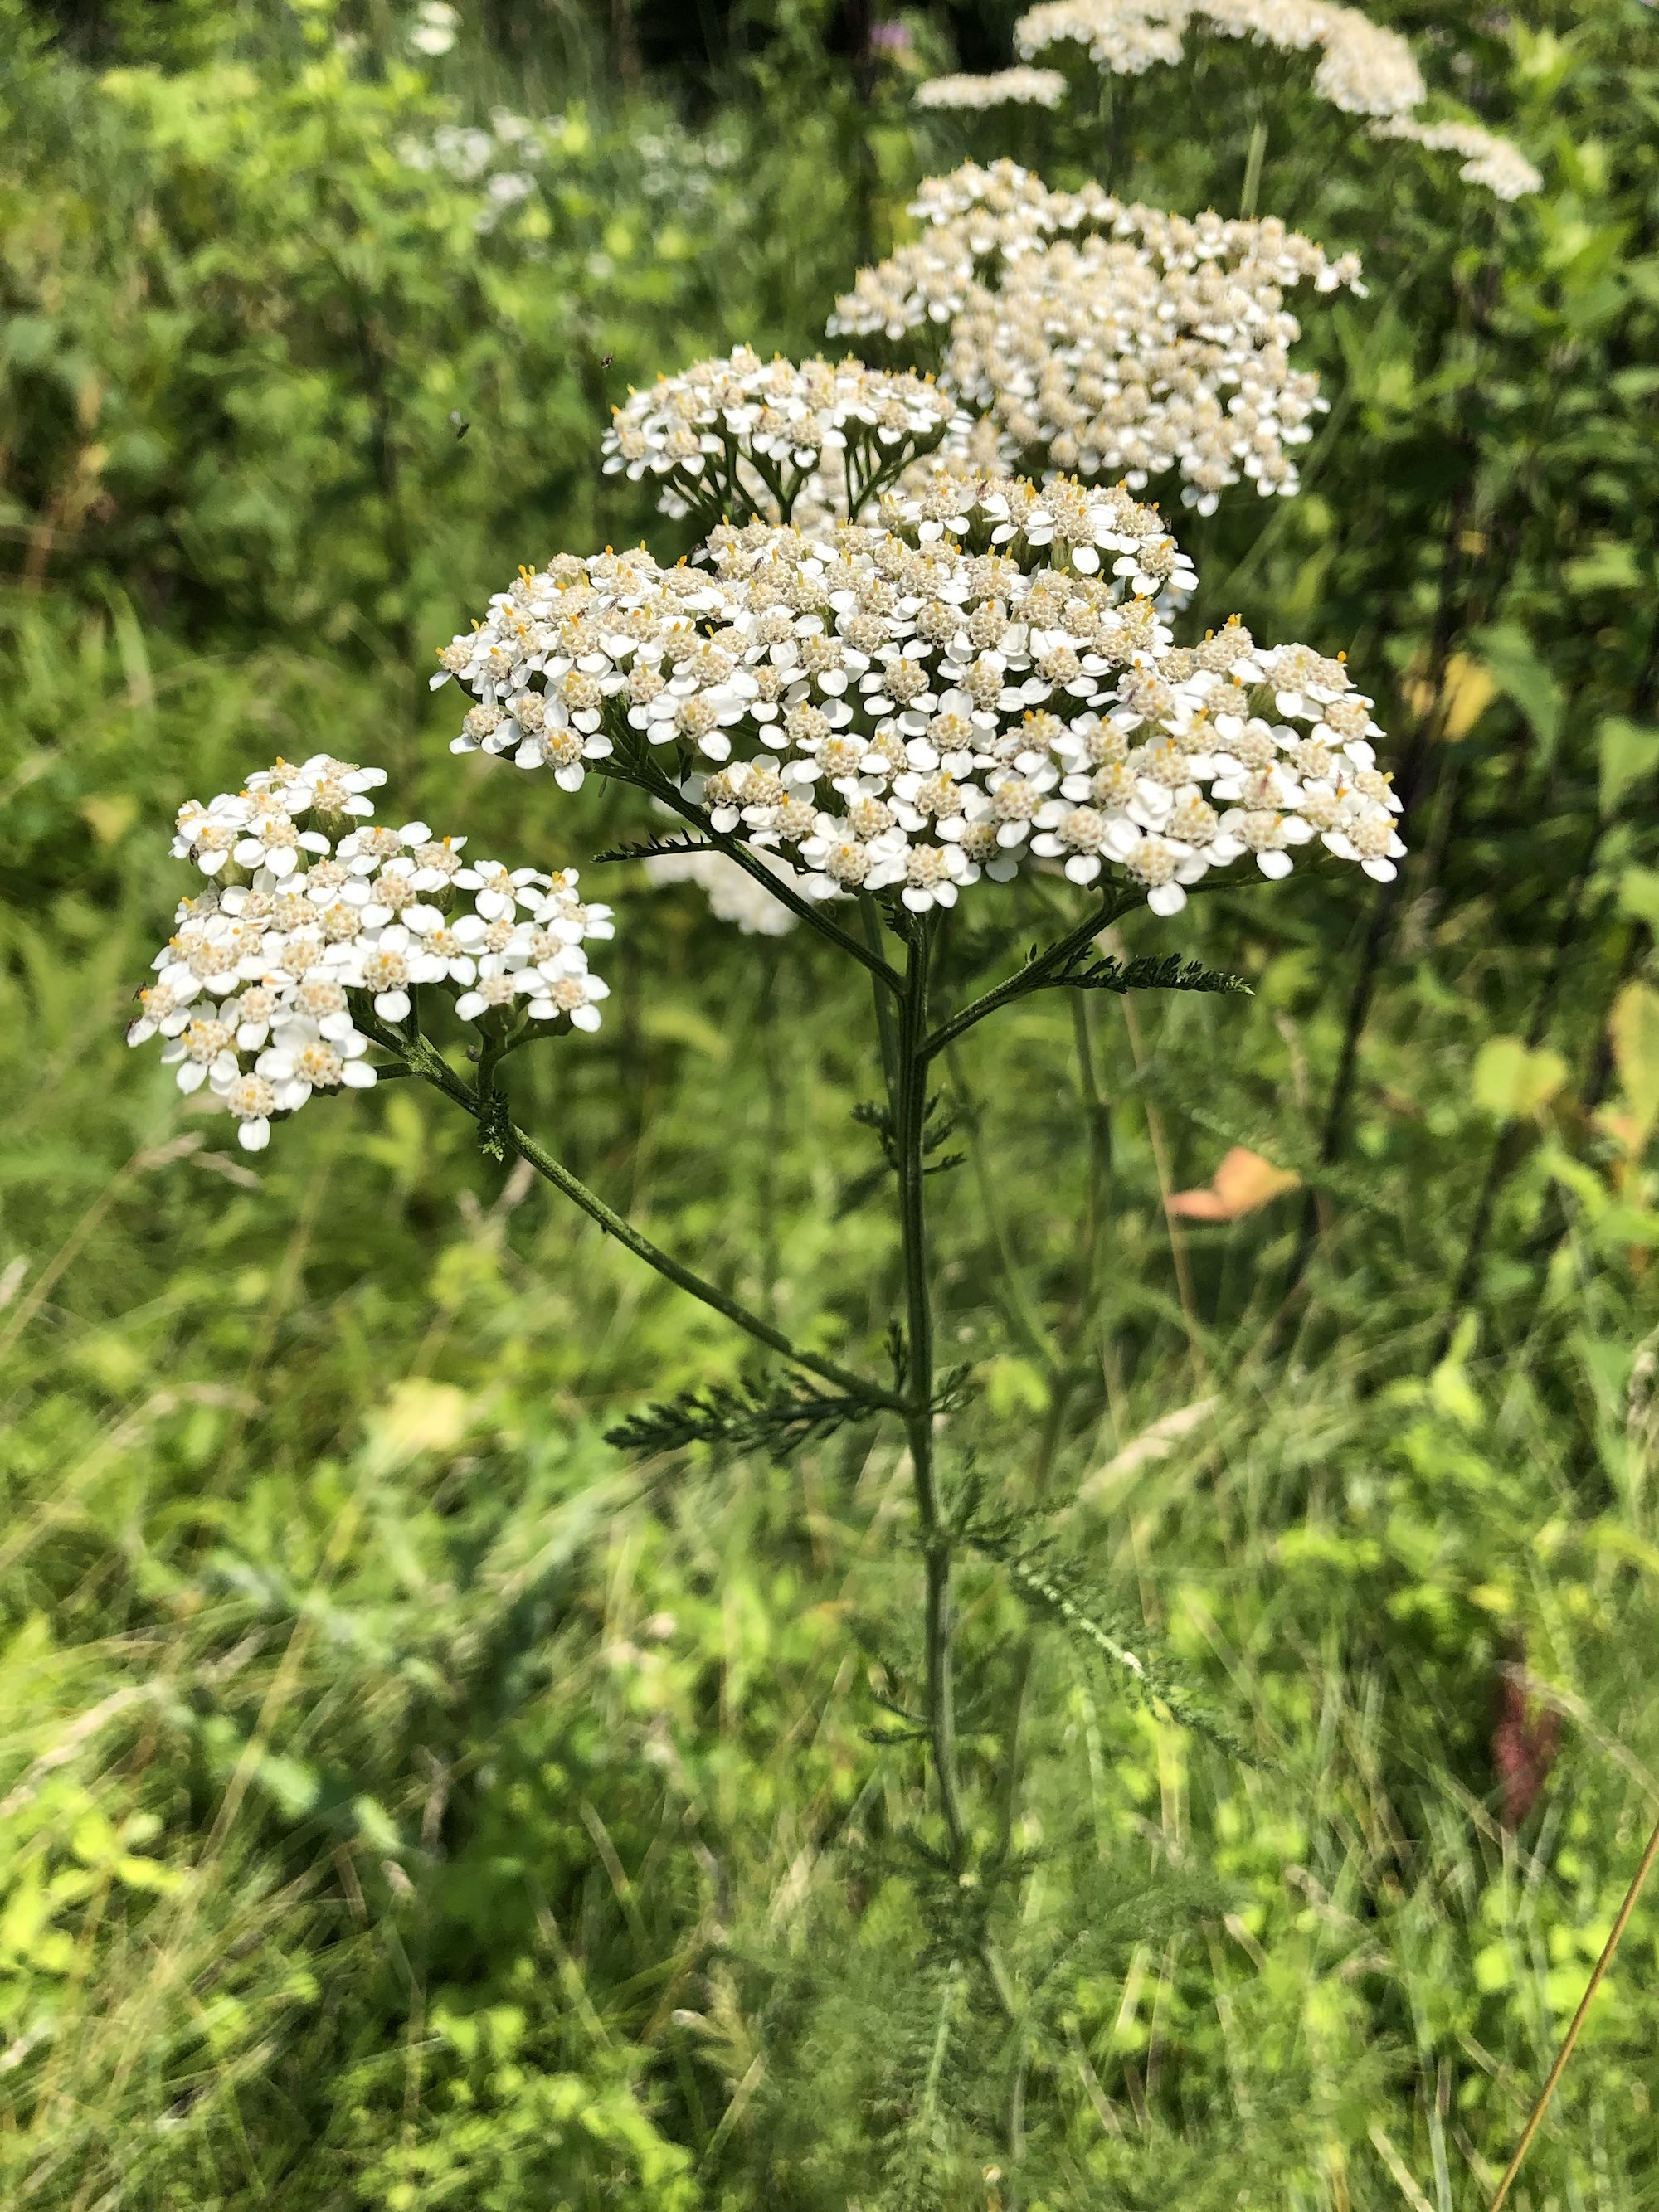 Common Yarrow on shore of Marion Dunn Pond on July 8, 2019.